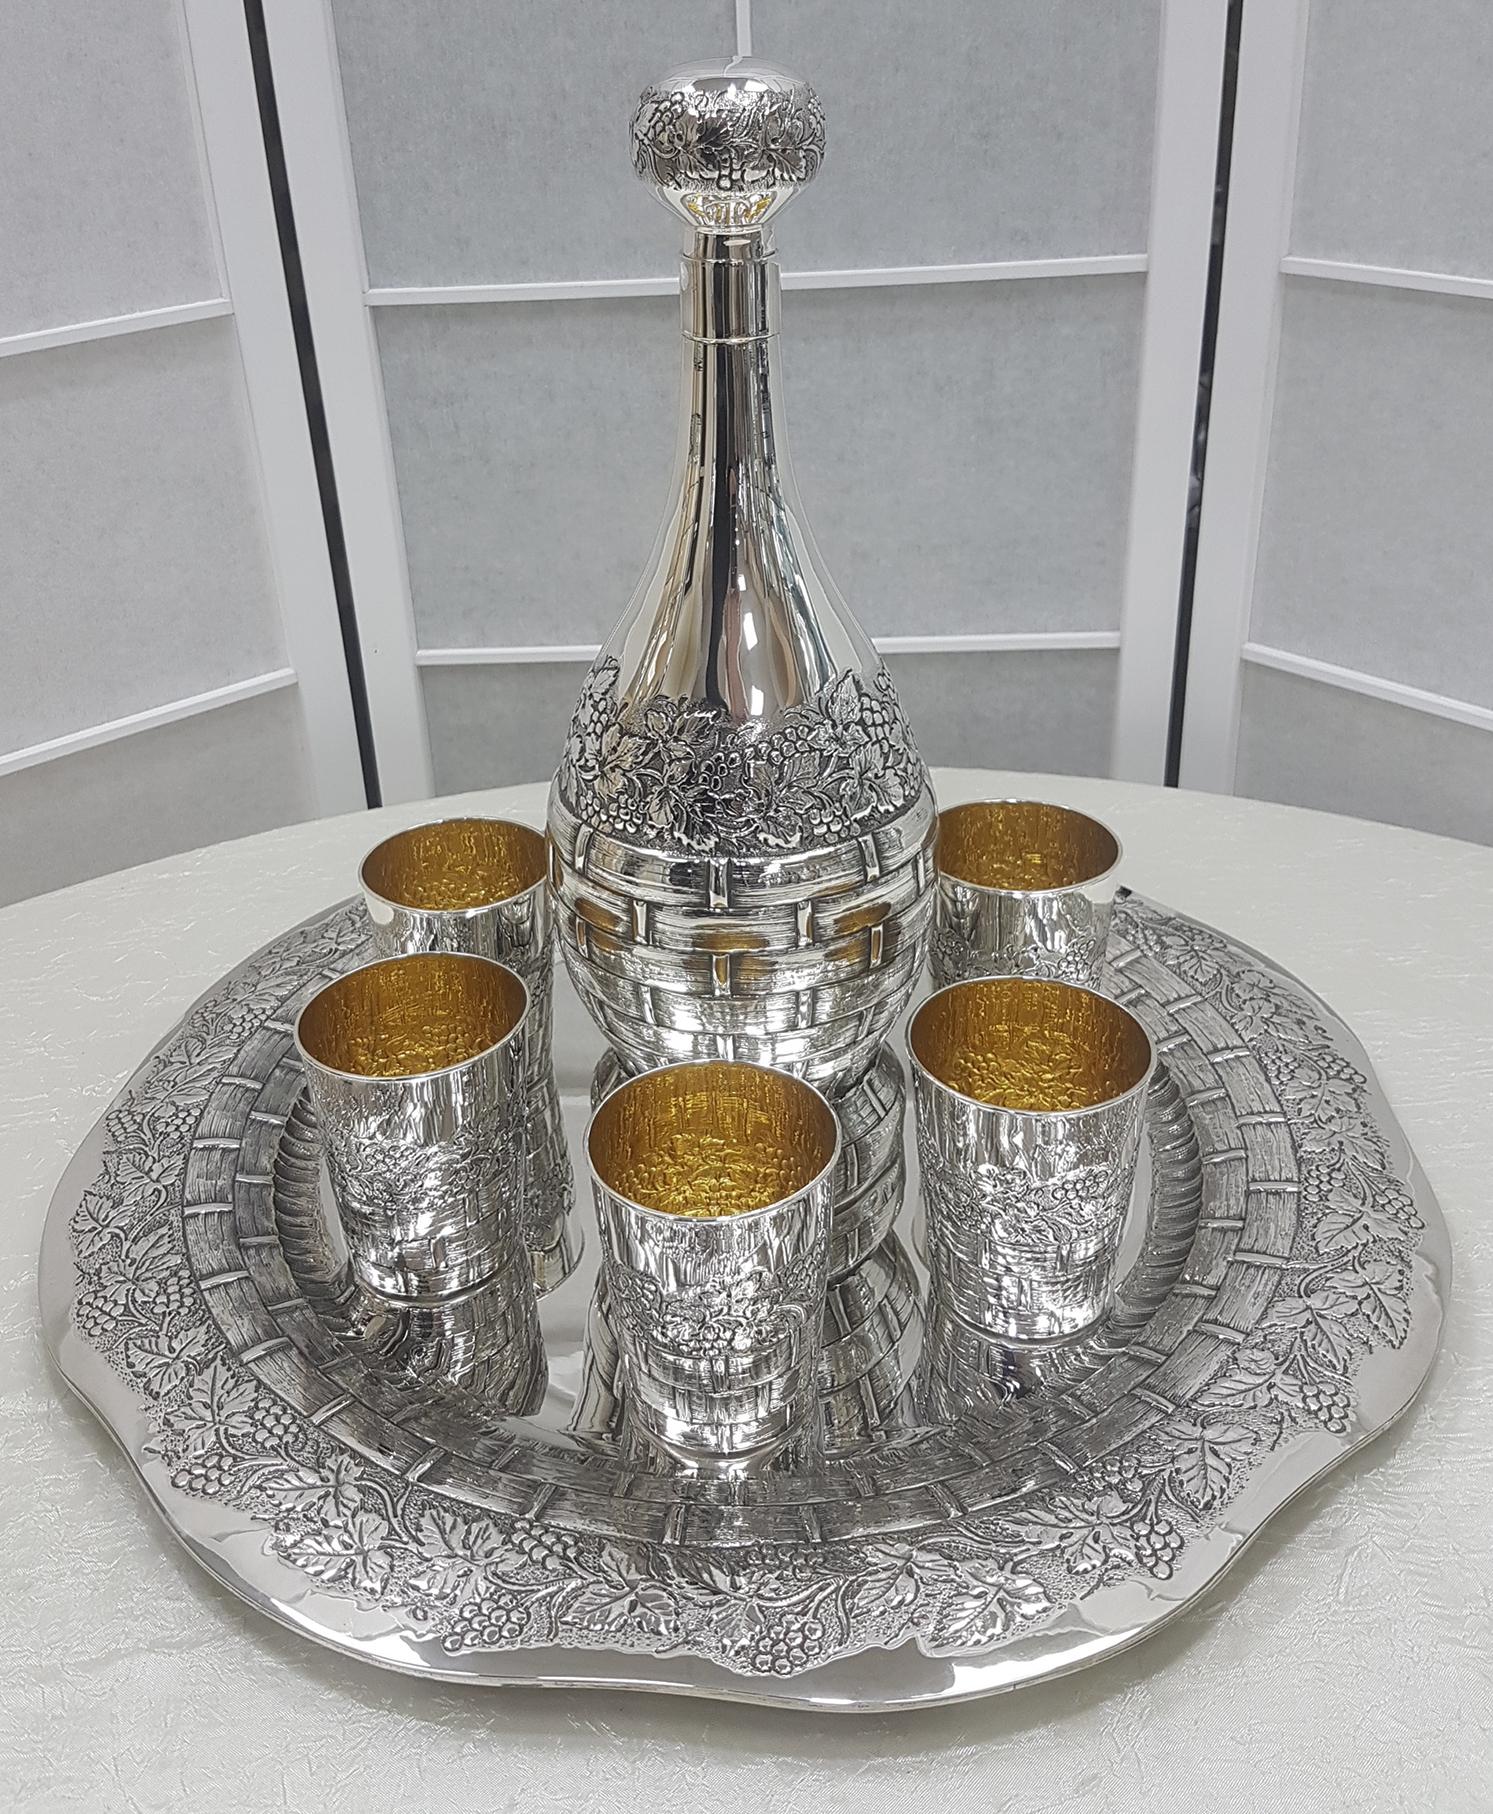 Important silver wine set consisting of tray, bottle and 6 beakers.
The tray has a round shape with an embossed and chiseled edge with bunches of grapes, leaves and wood of the wine vat.
The bottle in the shape of a flask always embossed and